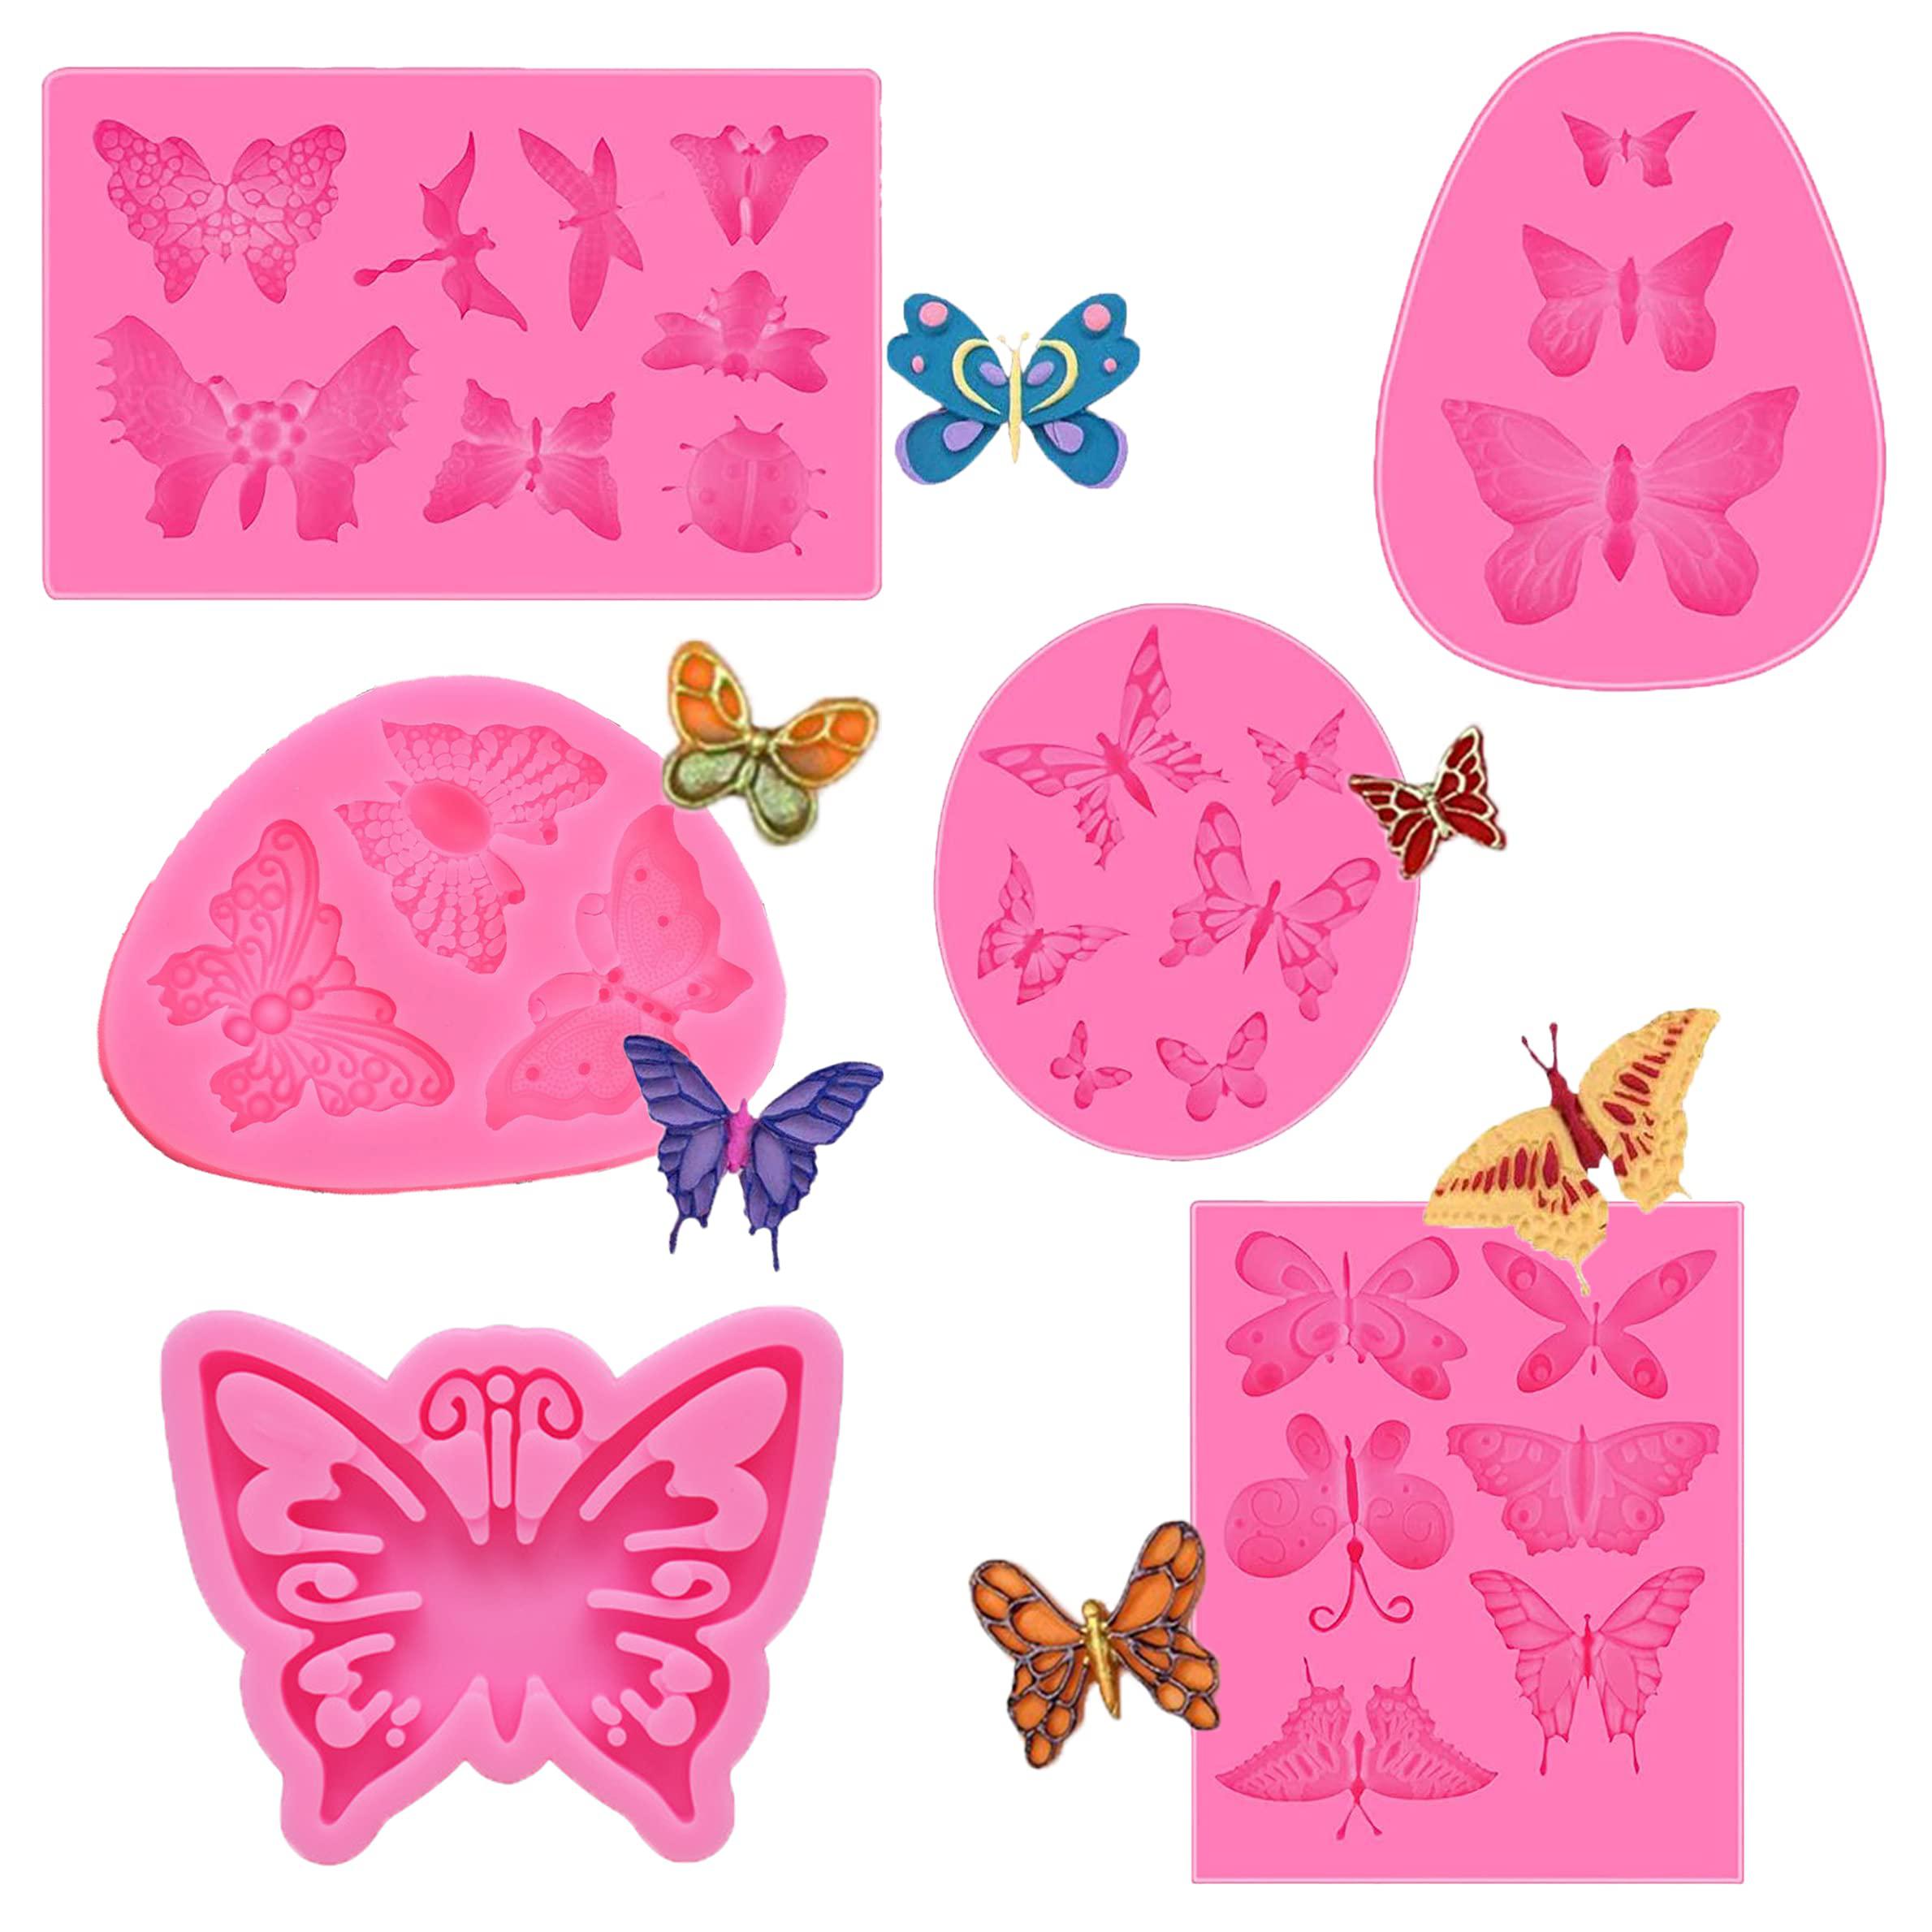 BOSOIRSOU 6 pcs butterfly silicone molds, bosoirsou non-stick baking mould fondant mold for cupcake cake decoration gummy chocolate can